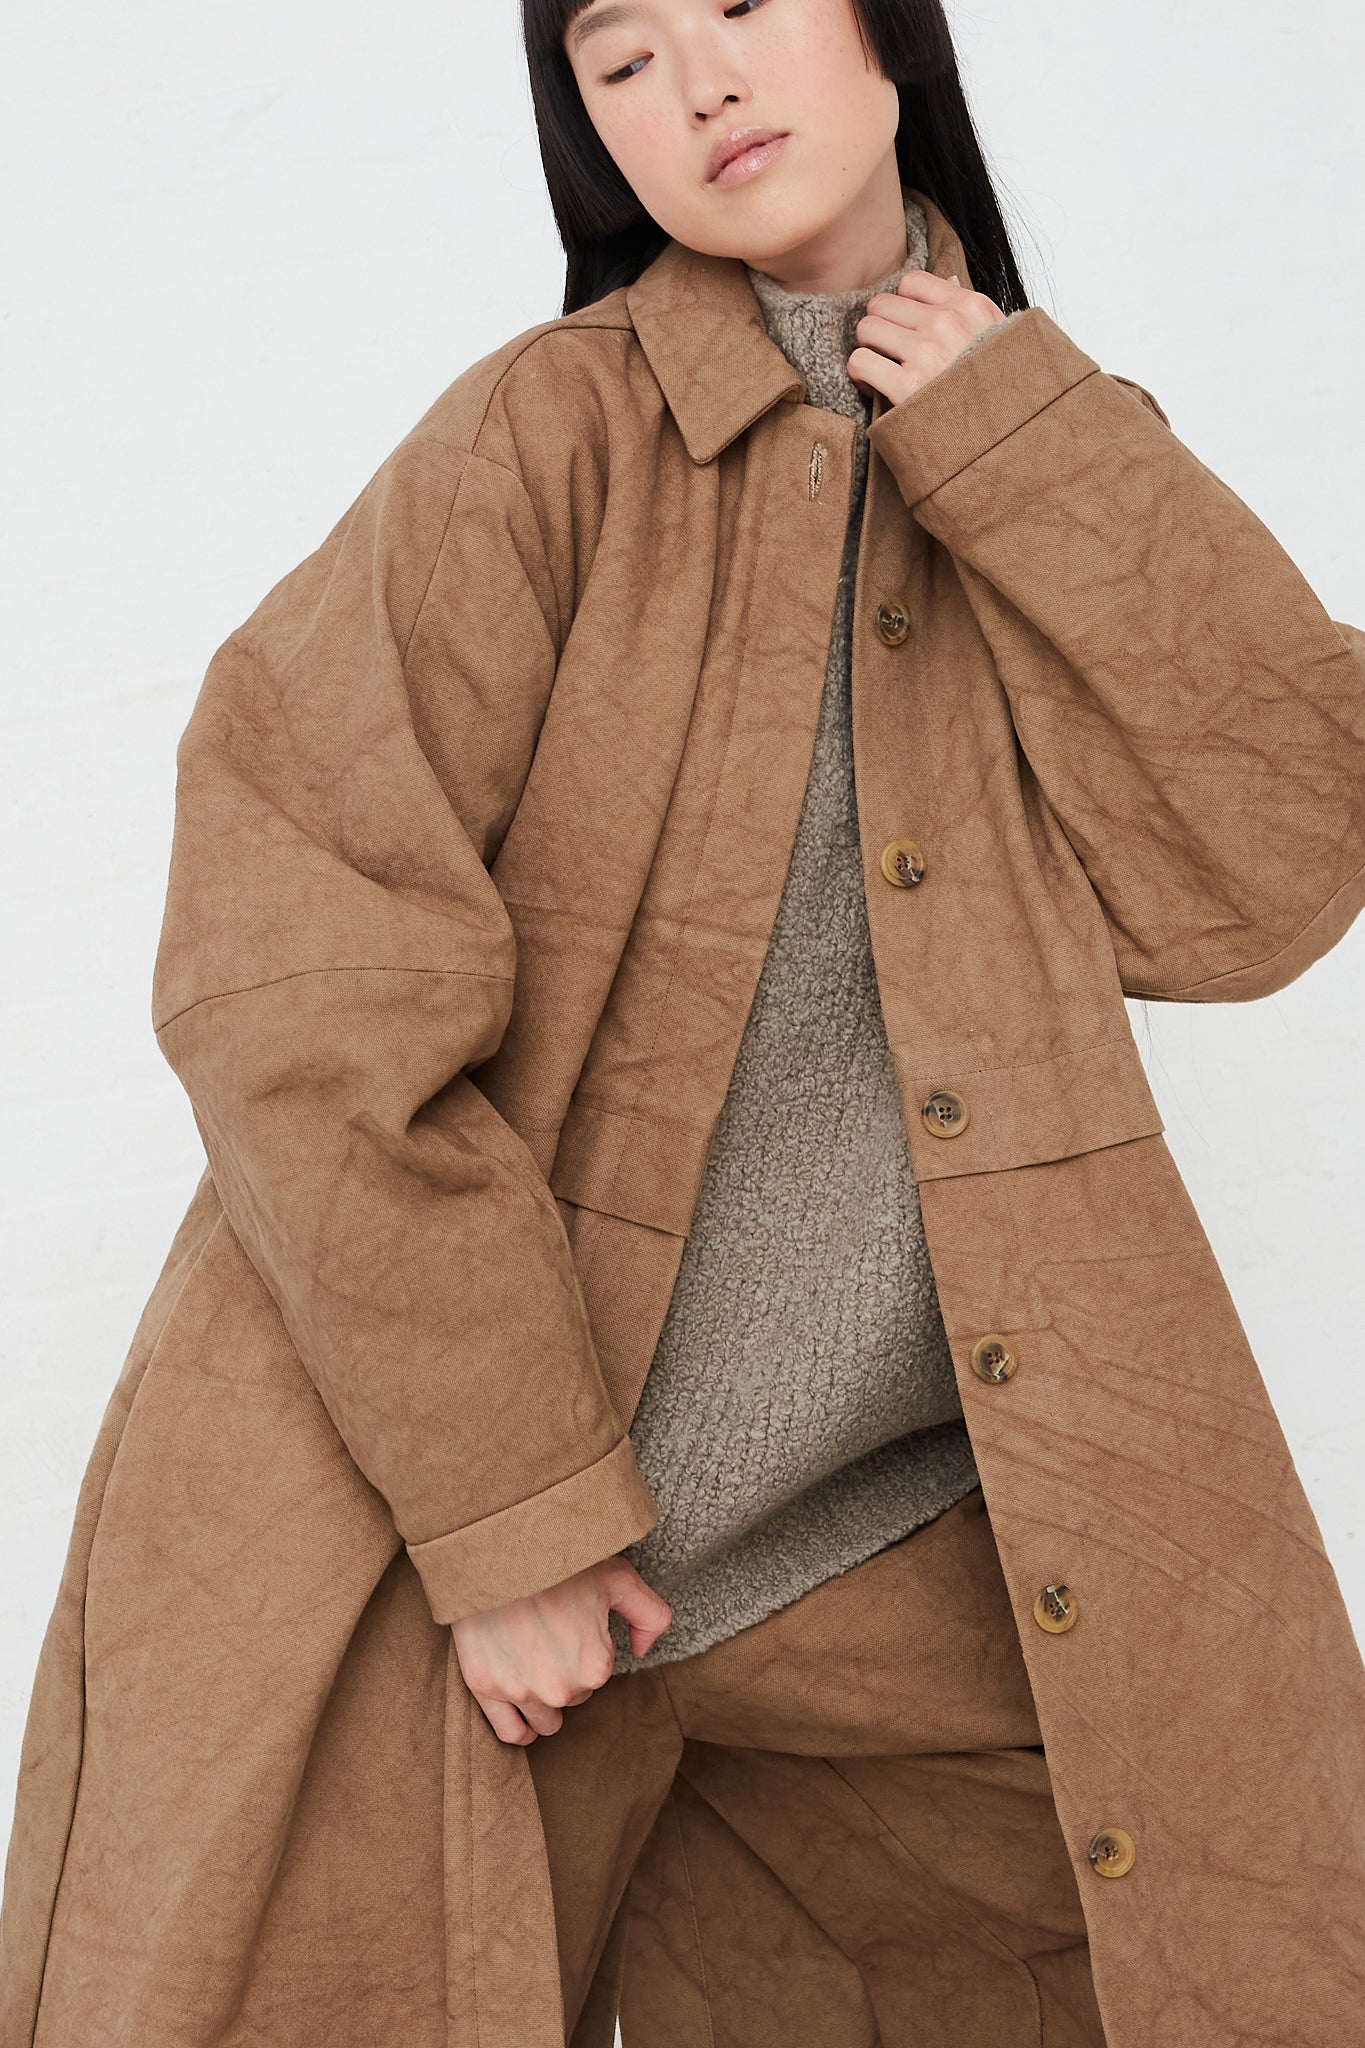 Oversized Canvas Trench by Lauren Manoogian for Oroboro Front Upclose